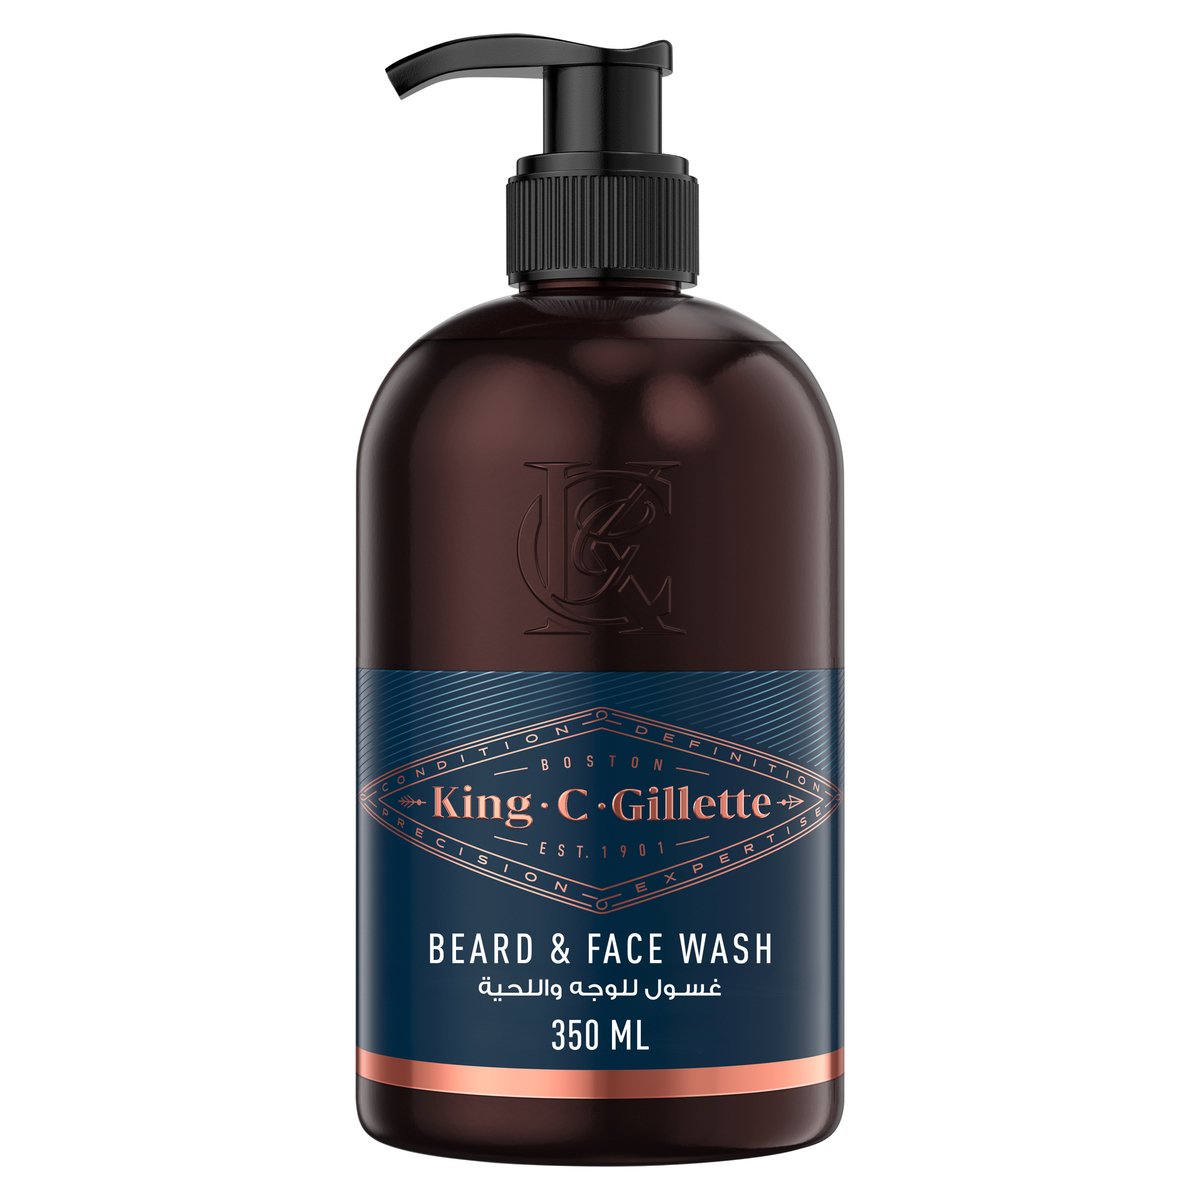 King C. Gillette Men's Beard and Face Wash with Coconut Water Argan Oil and Avocado Oil 350 ml